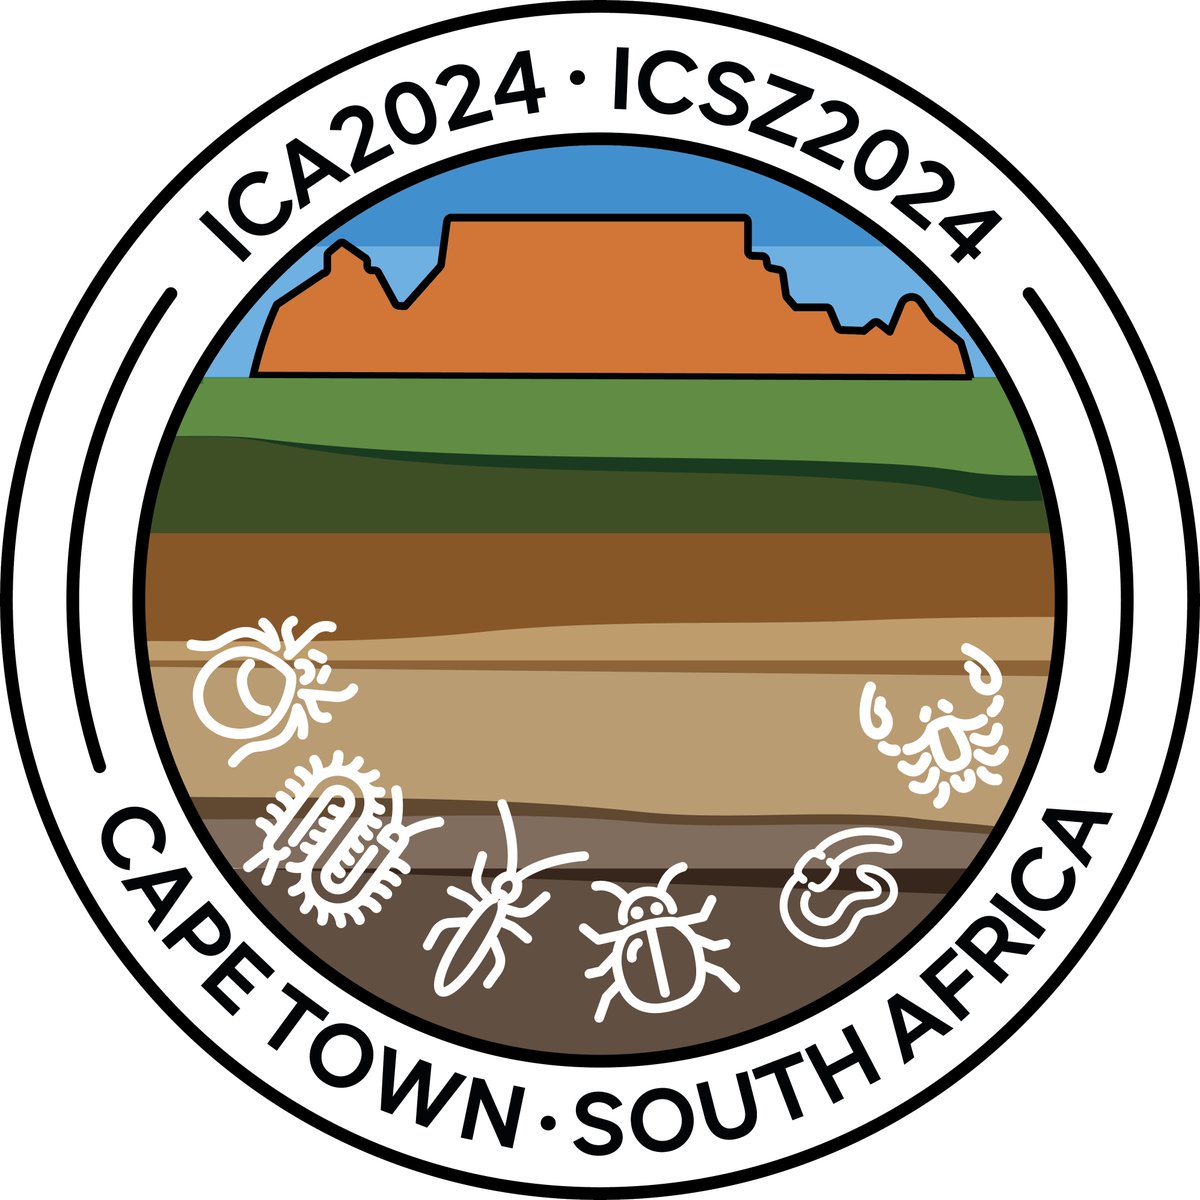 Come join us in Cape Town, South Africa for an amazing international meeting on all things soil fauna! For details go to: icsz2024.org. Please share. #soilfauna #soilhealth #ICSZICA2024 @WomenInSoilEco @theGSBI @AntonCollembola